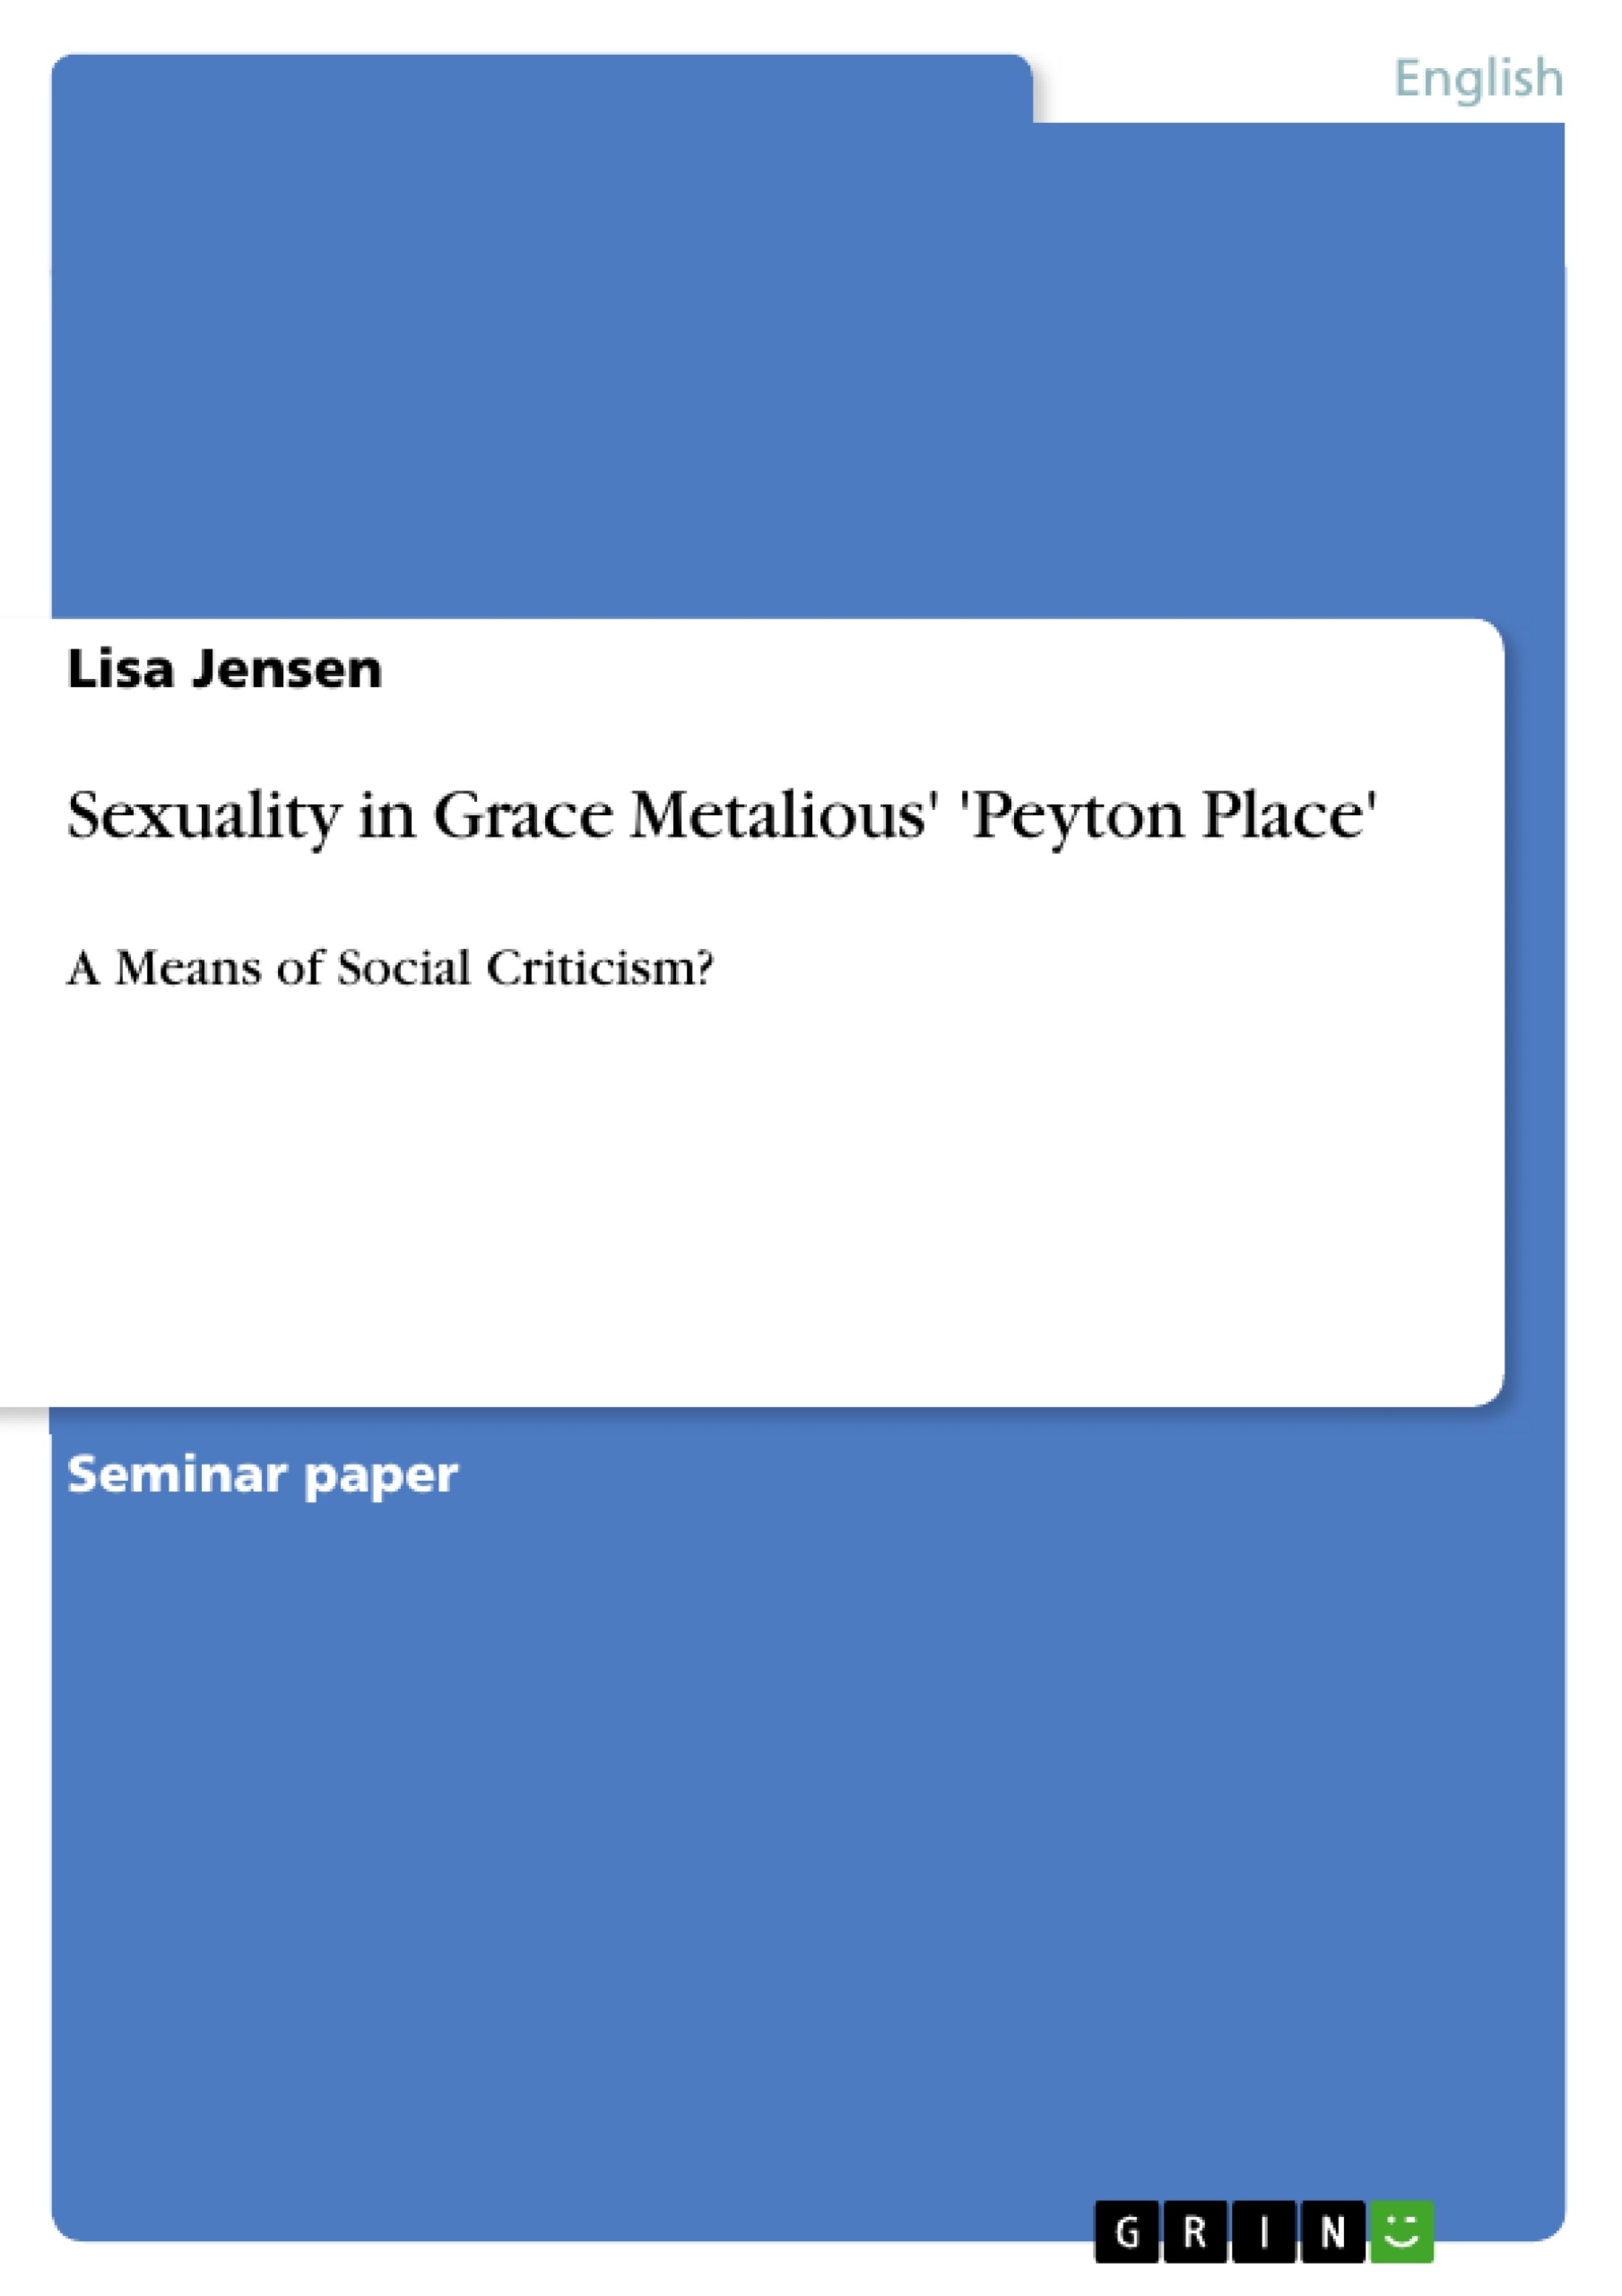 Title: Sexuality in Grace Metalious' 'Peyton Place'